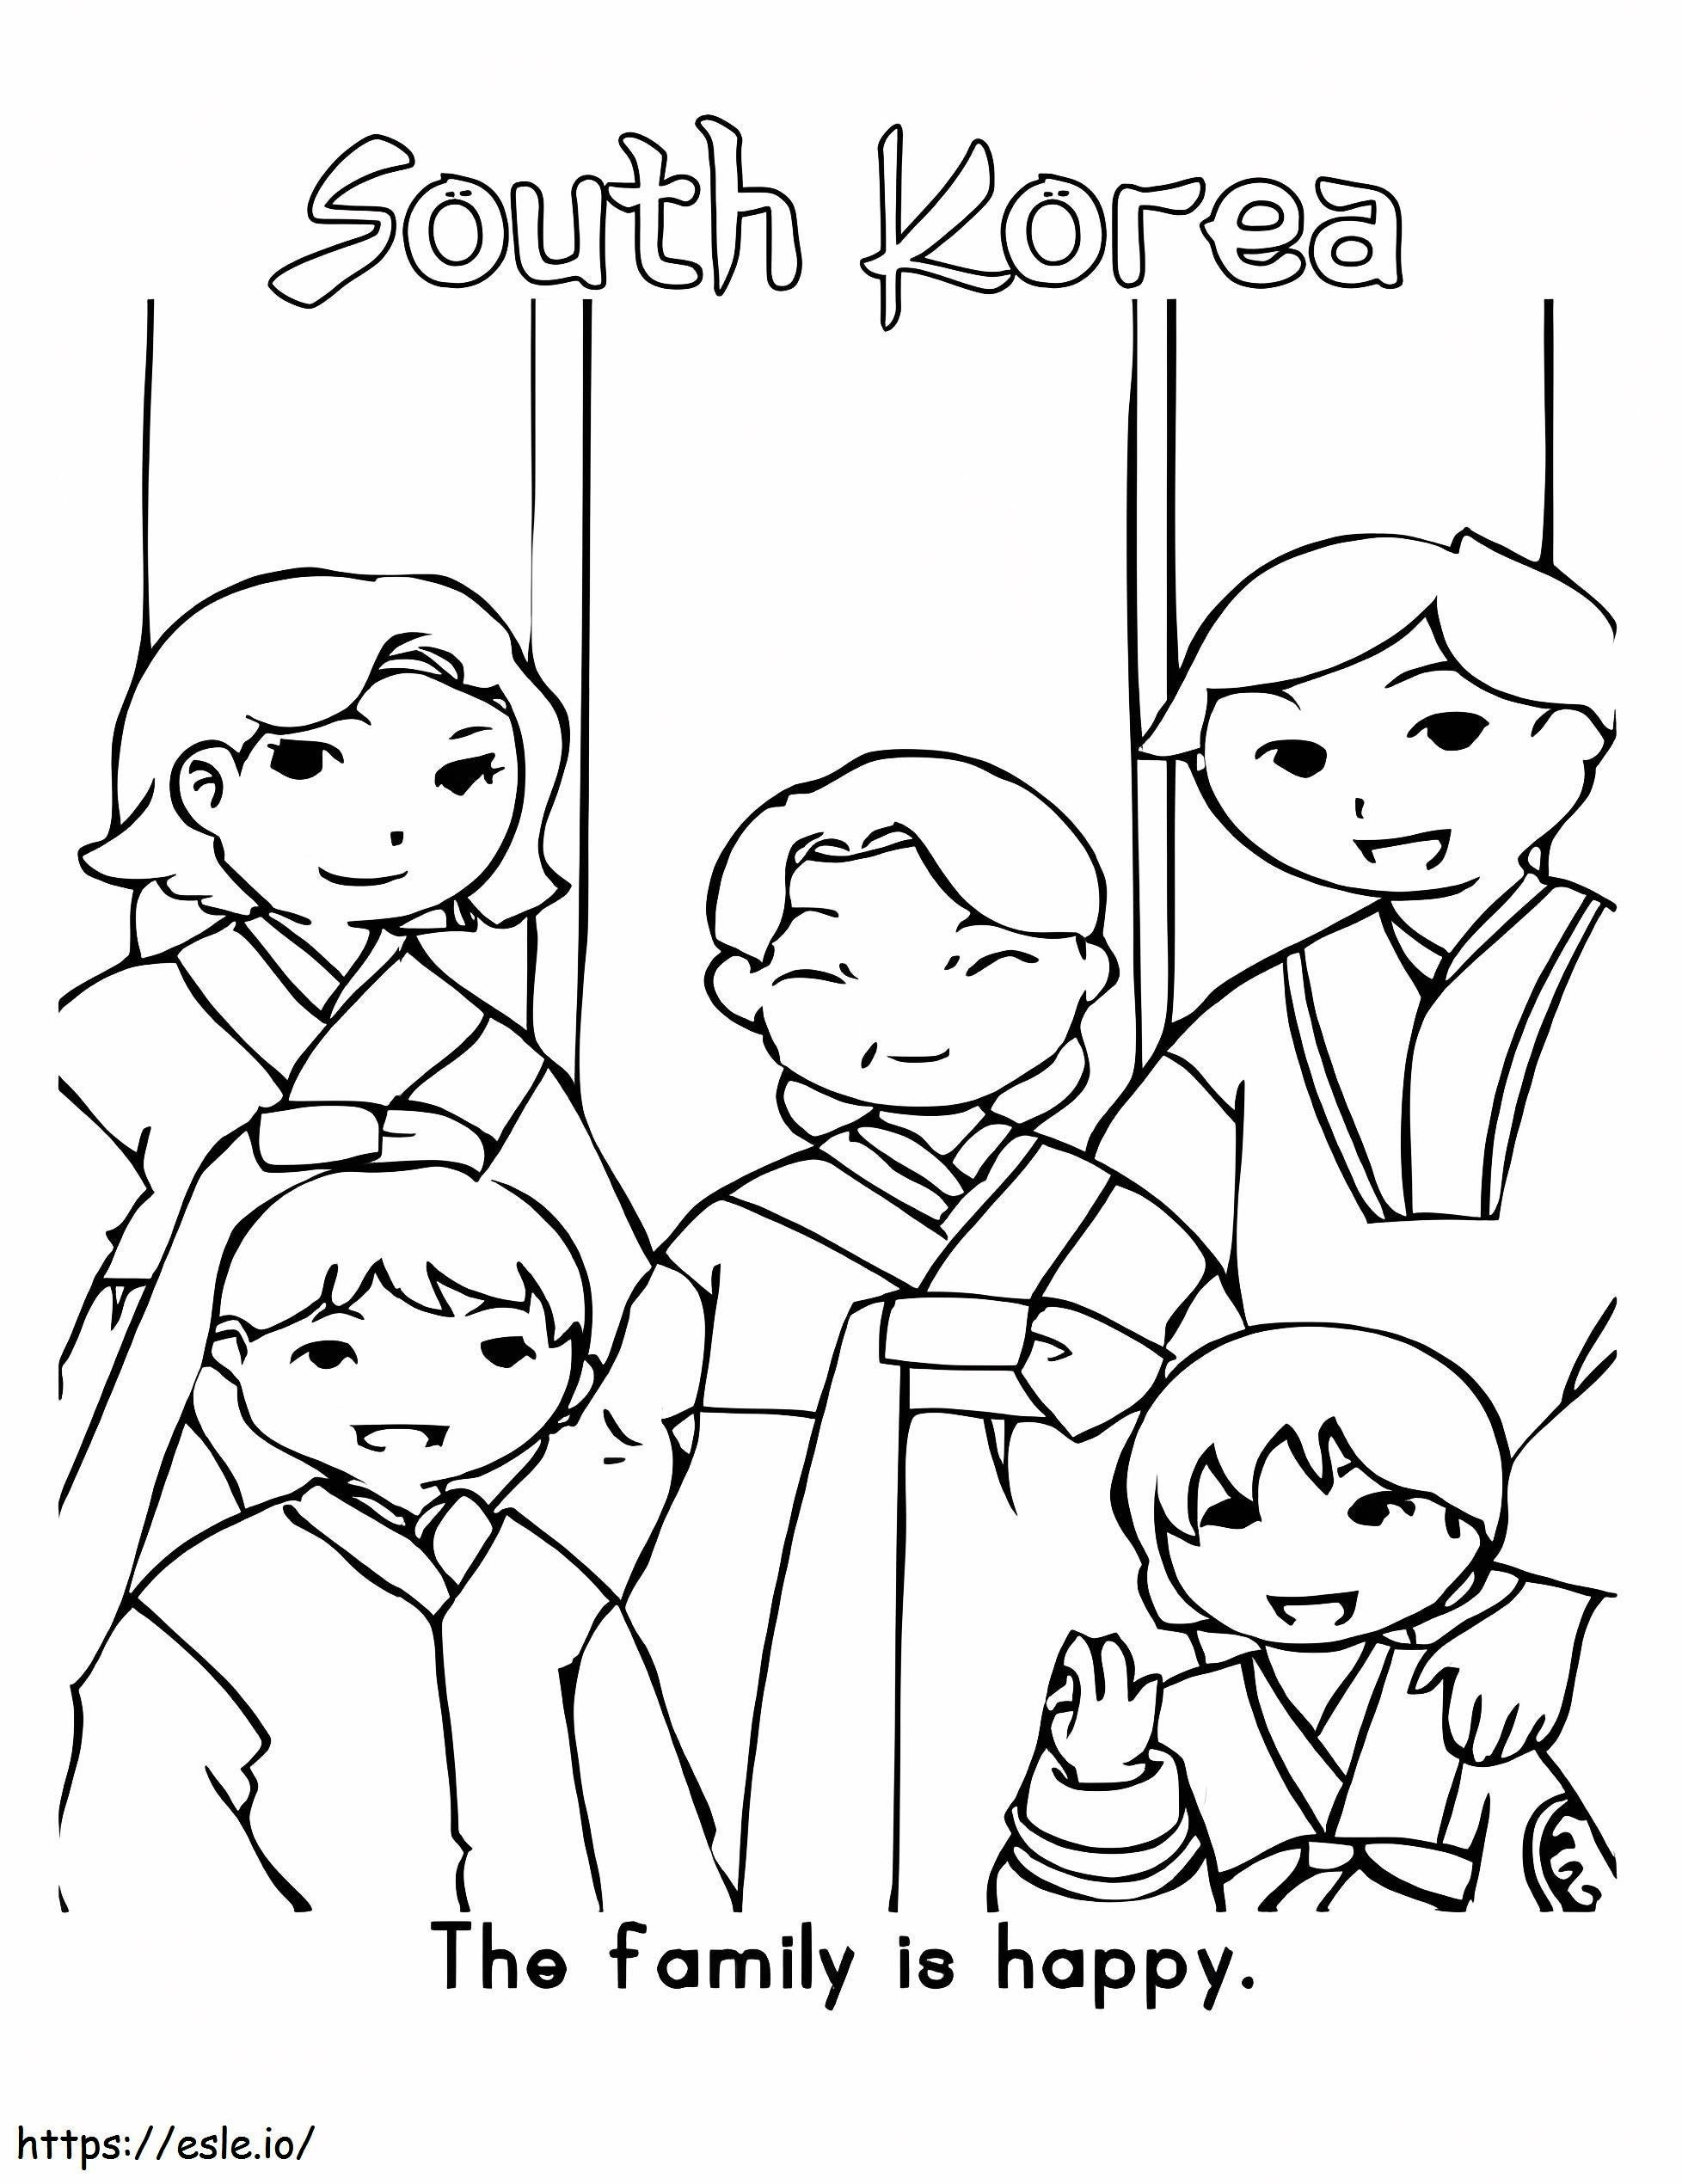 South Korea Family coloring page